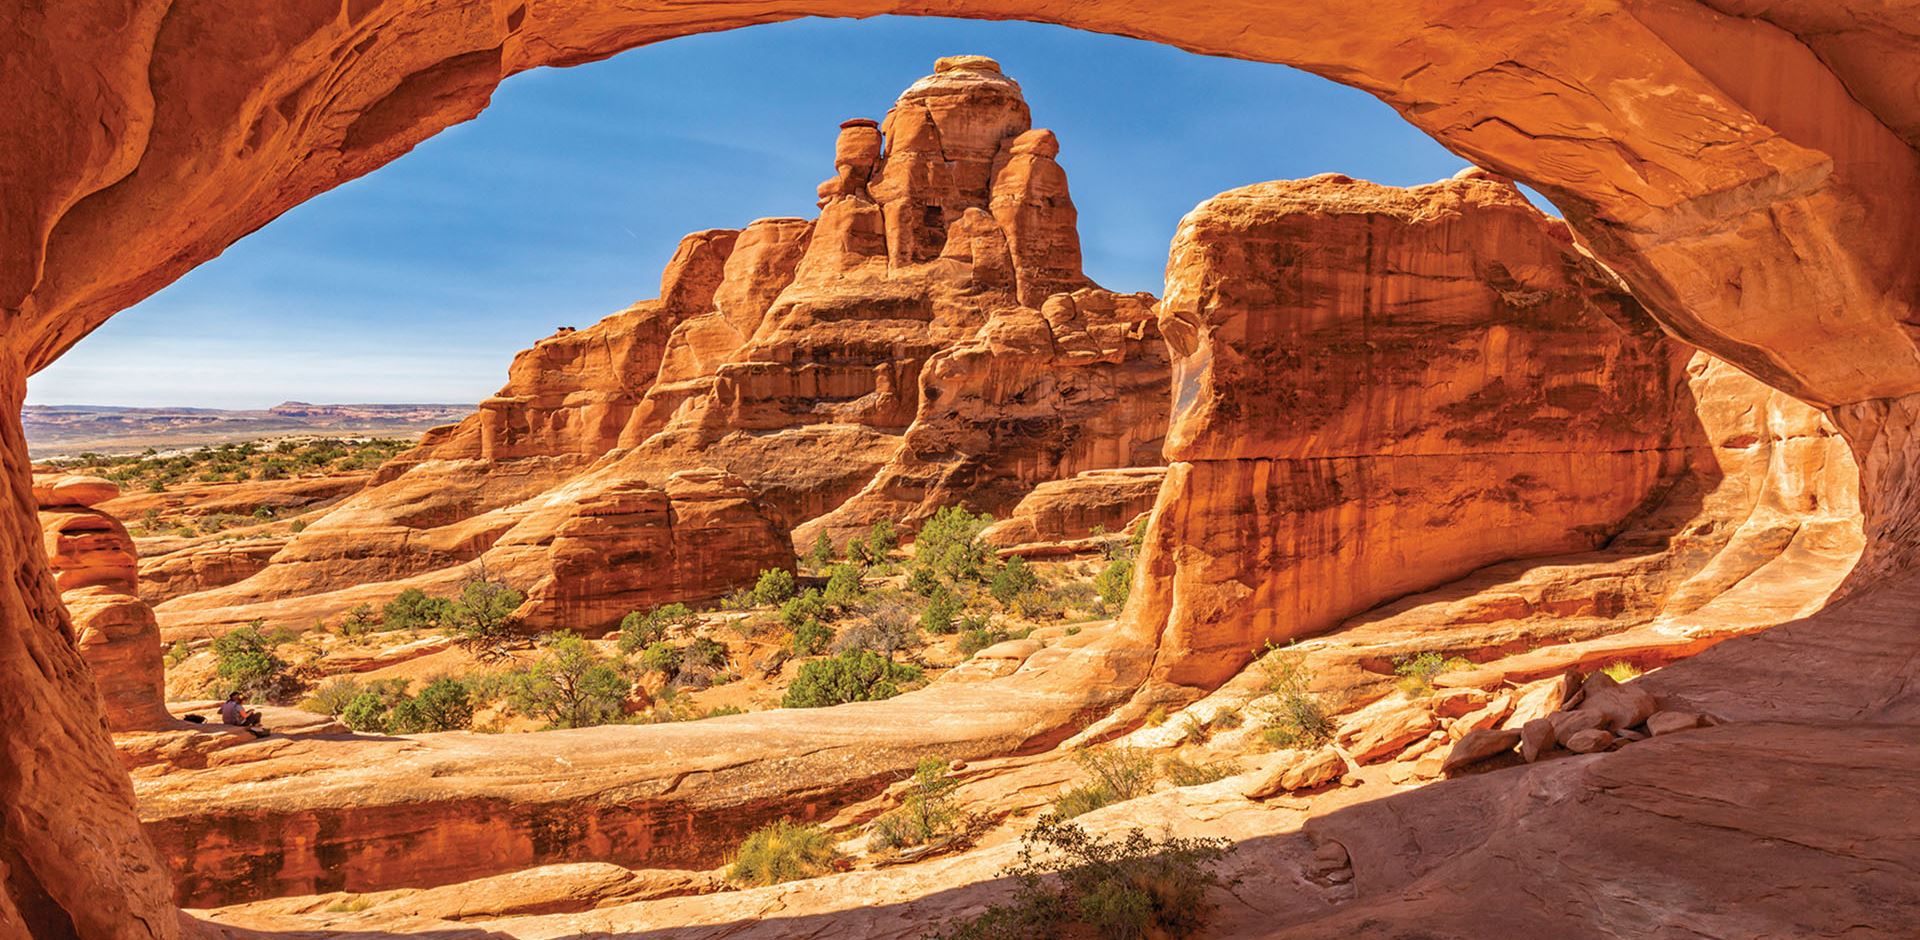 View of Arches National Park, Utah